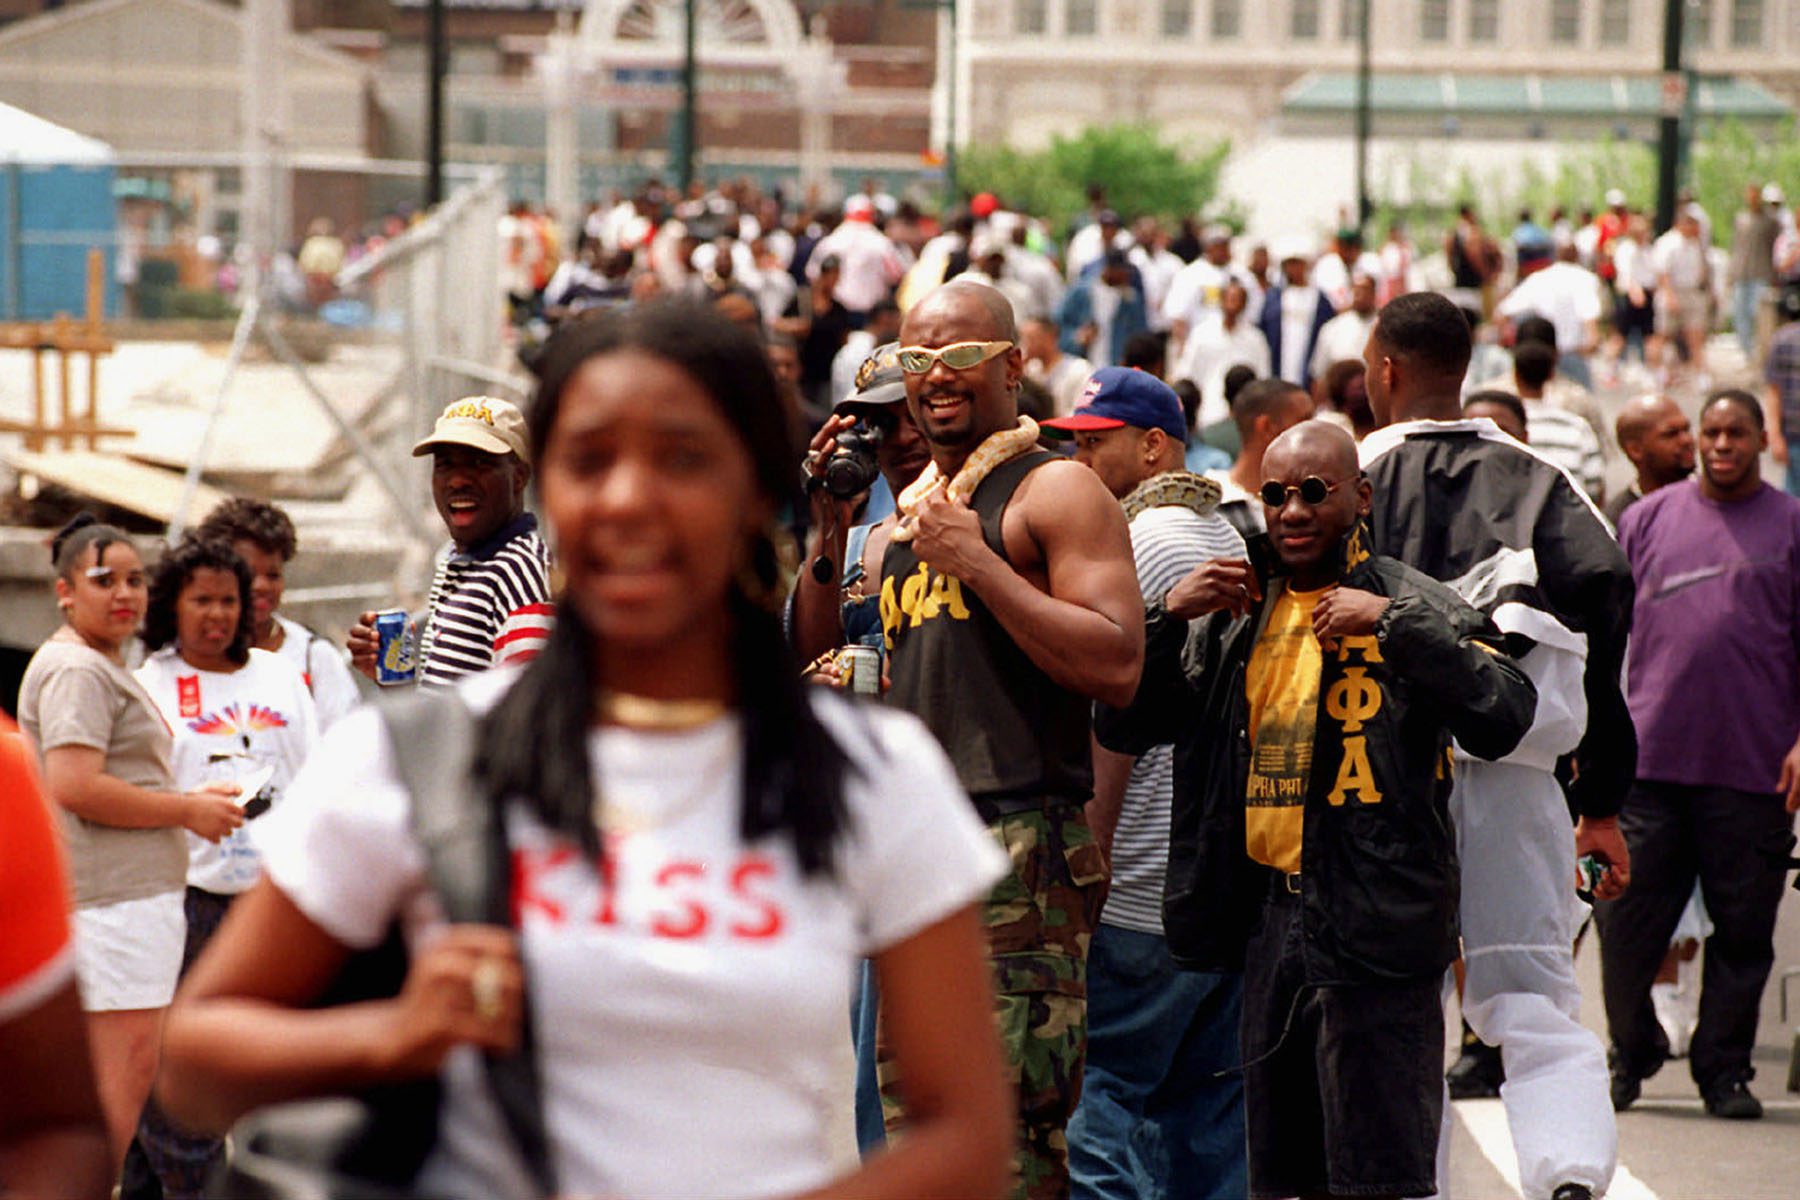 Woman passes group of Alphas and other freaknik attendants.